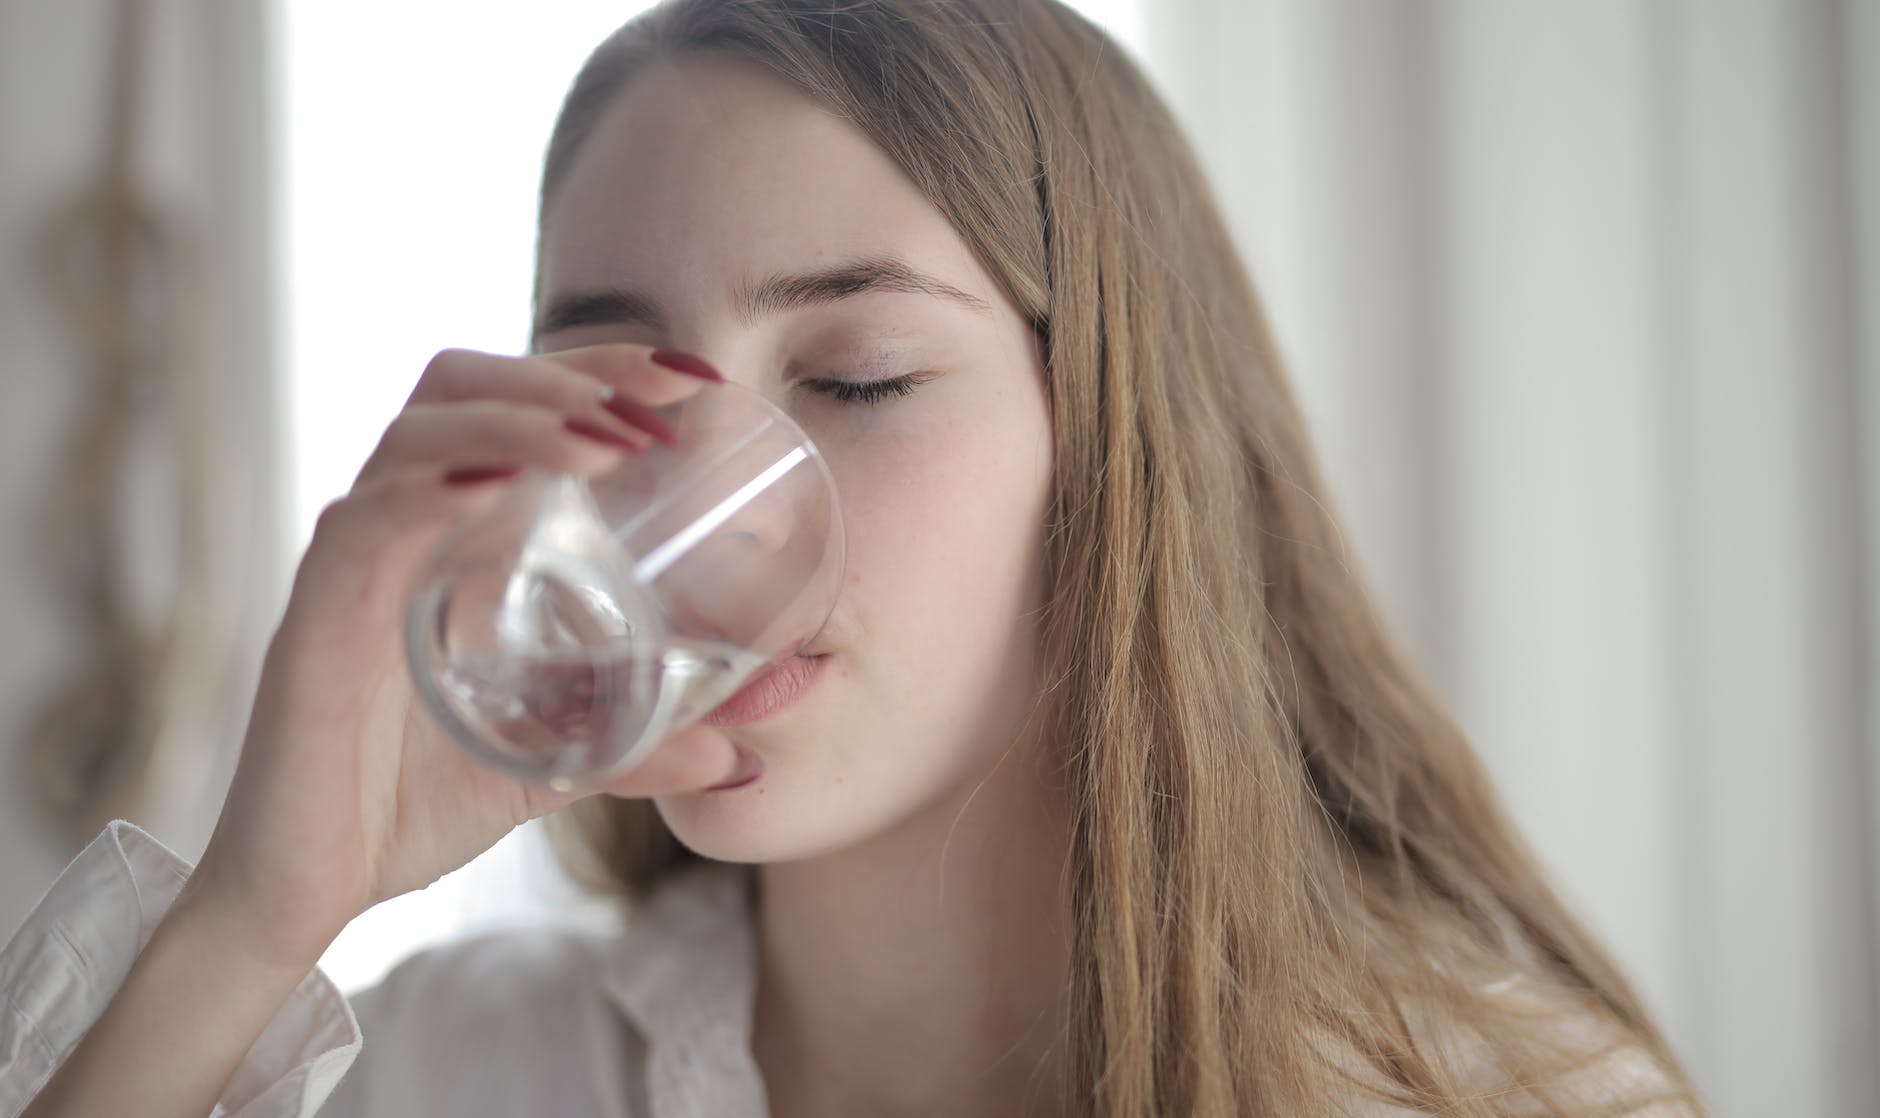 woman in white shirt drinking water from clear glass with her eyes closed